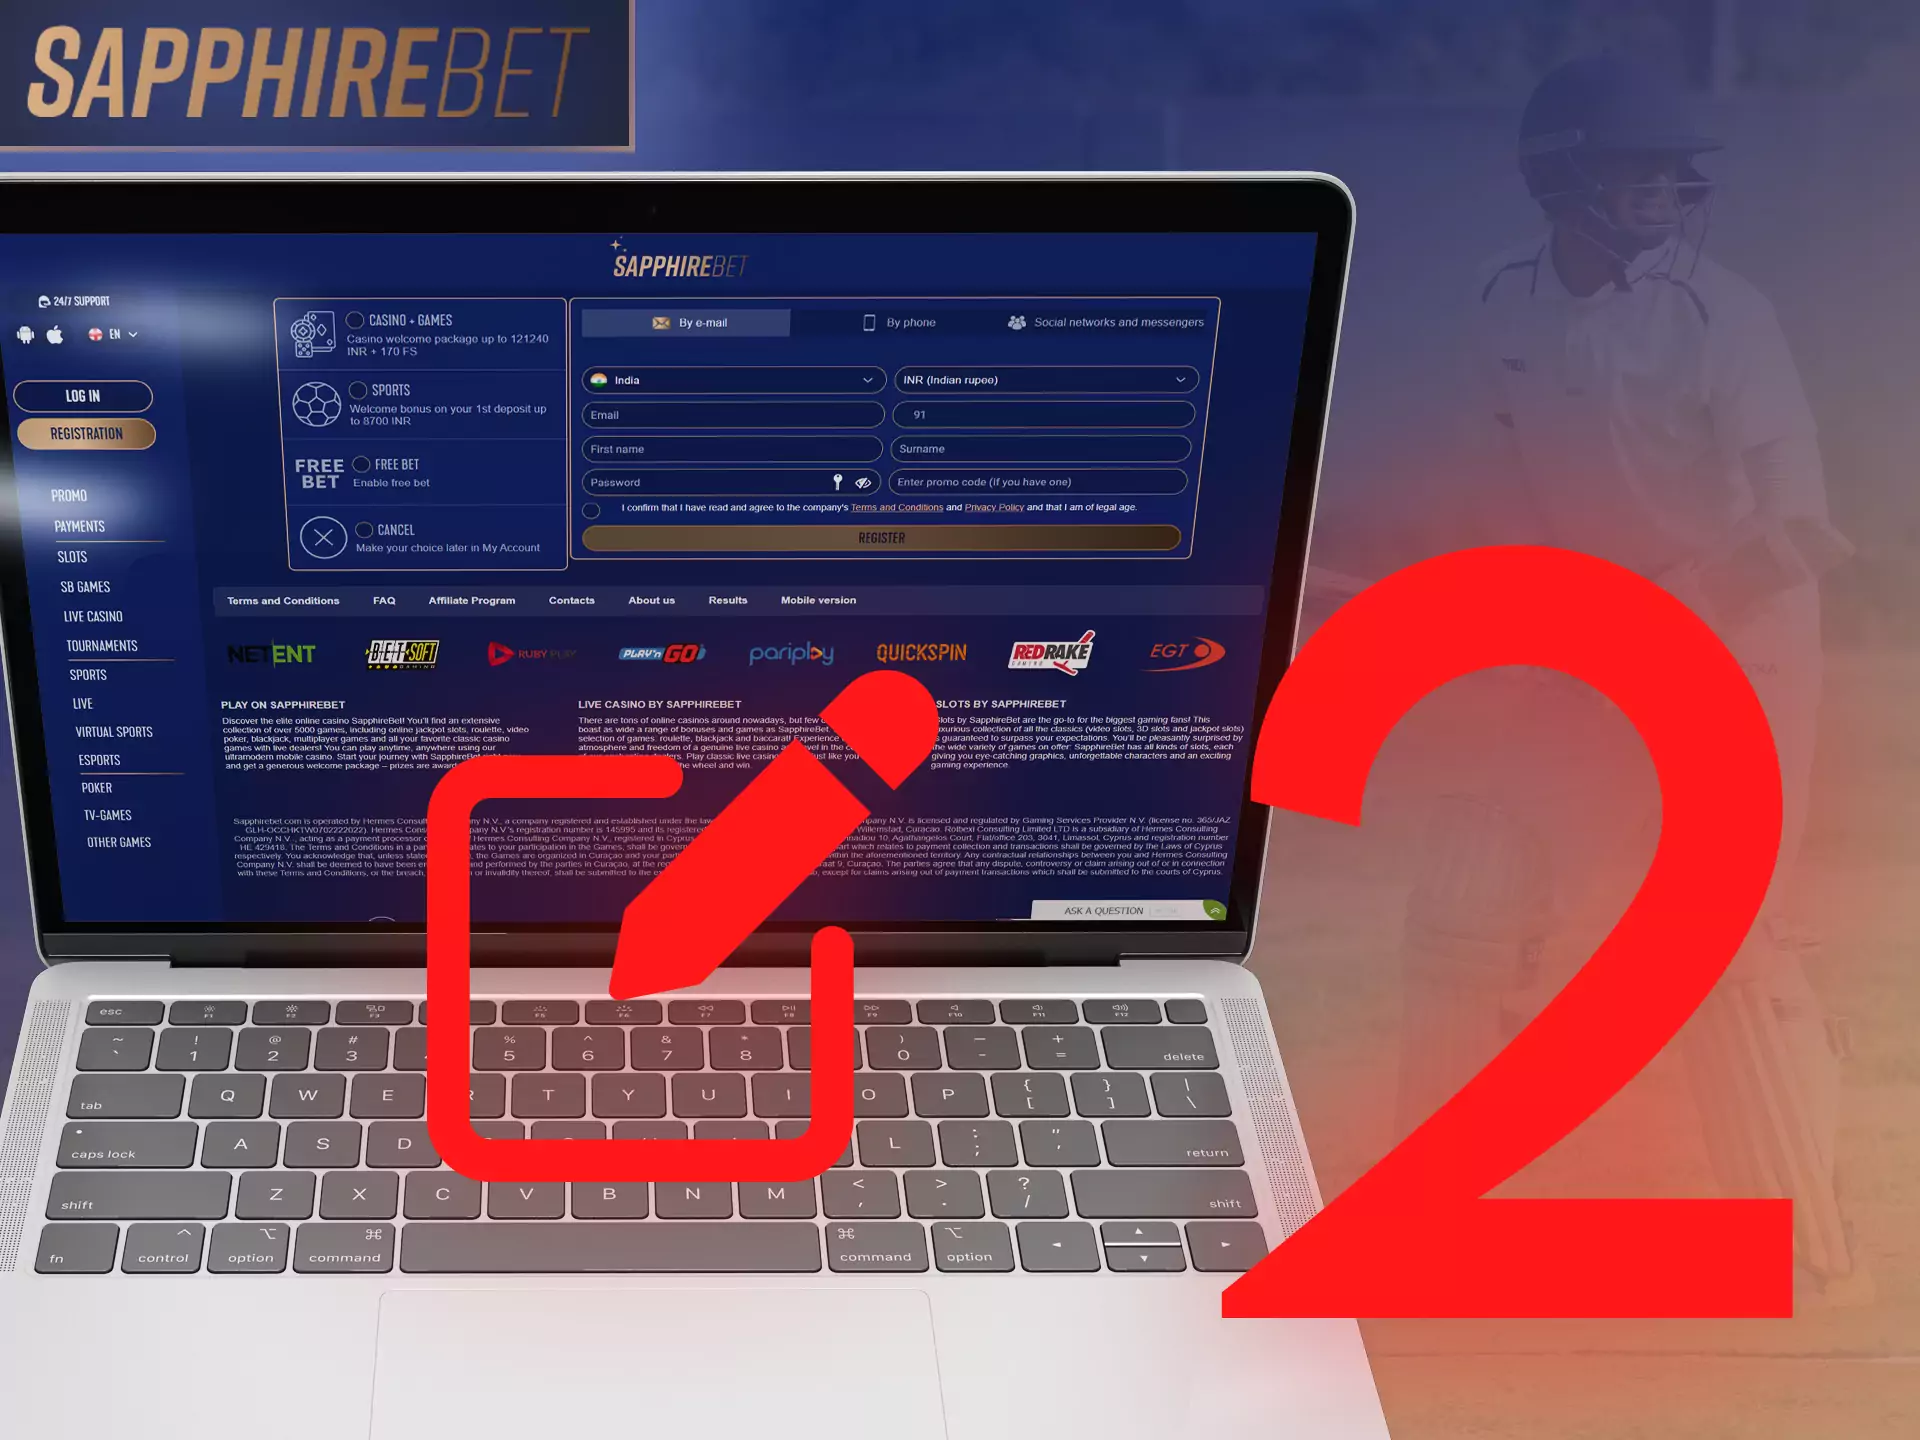 Fill in the gaps to provide all the necessary details for registration on Sapphirebet.